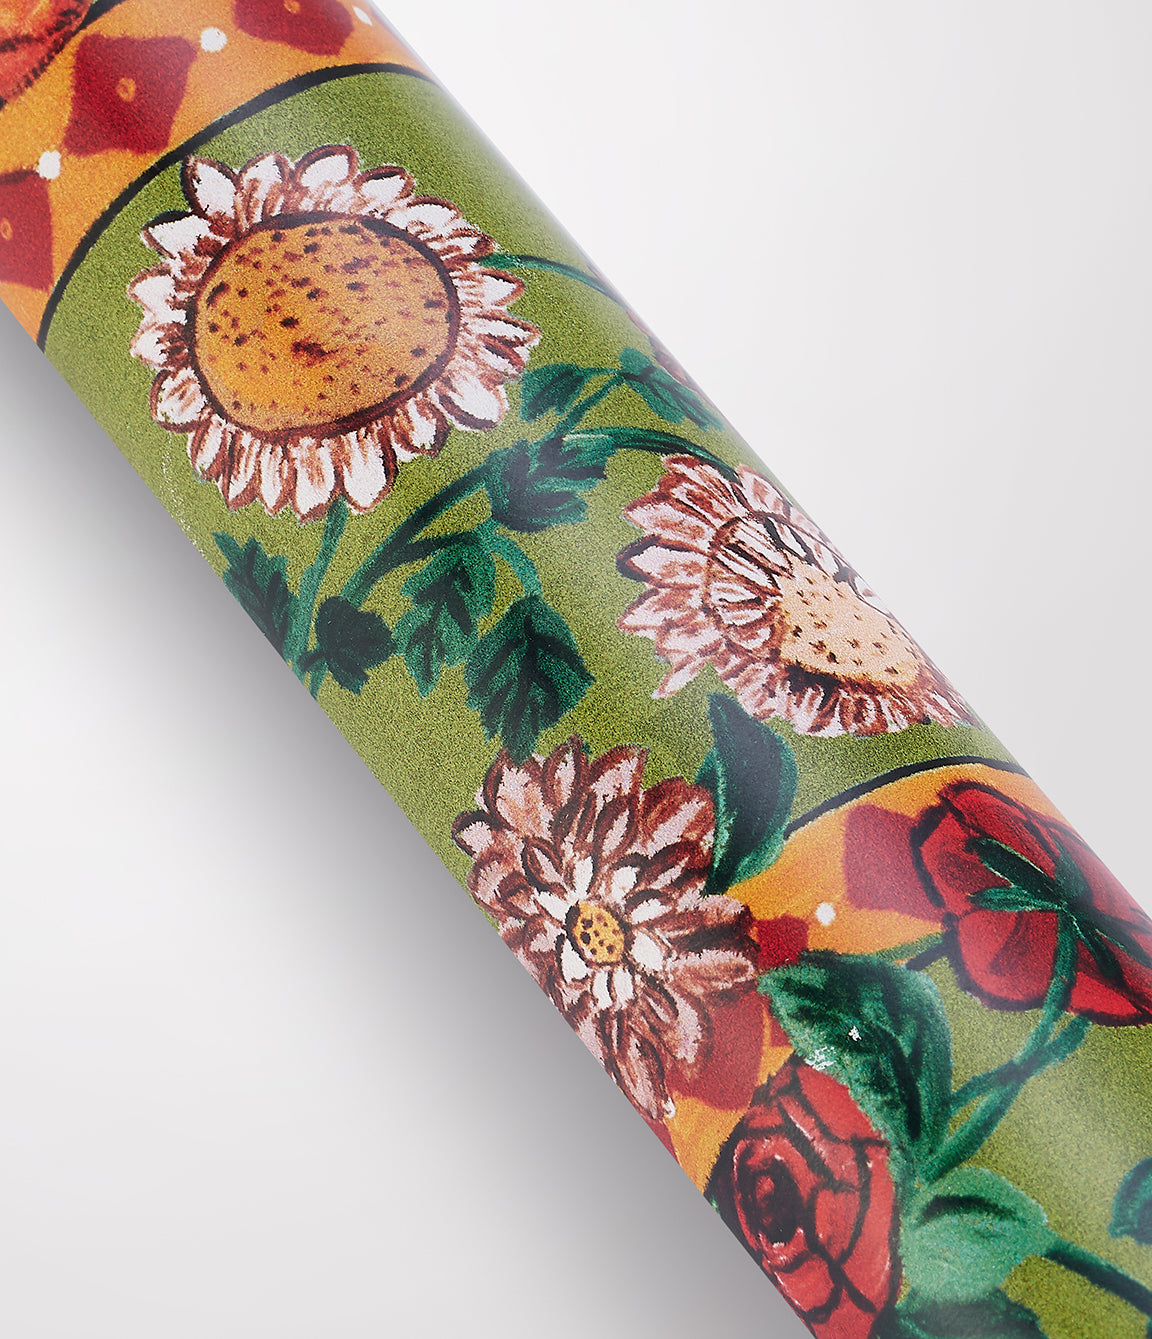 'Gallery Room Floral' Gift Wrap by Carly Beck - Olive